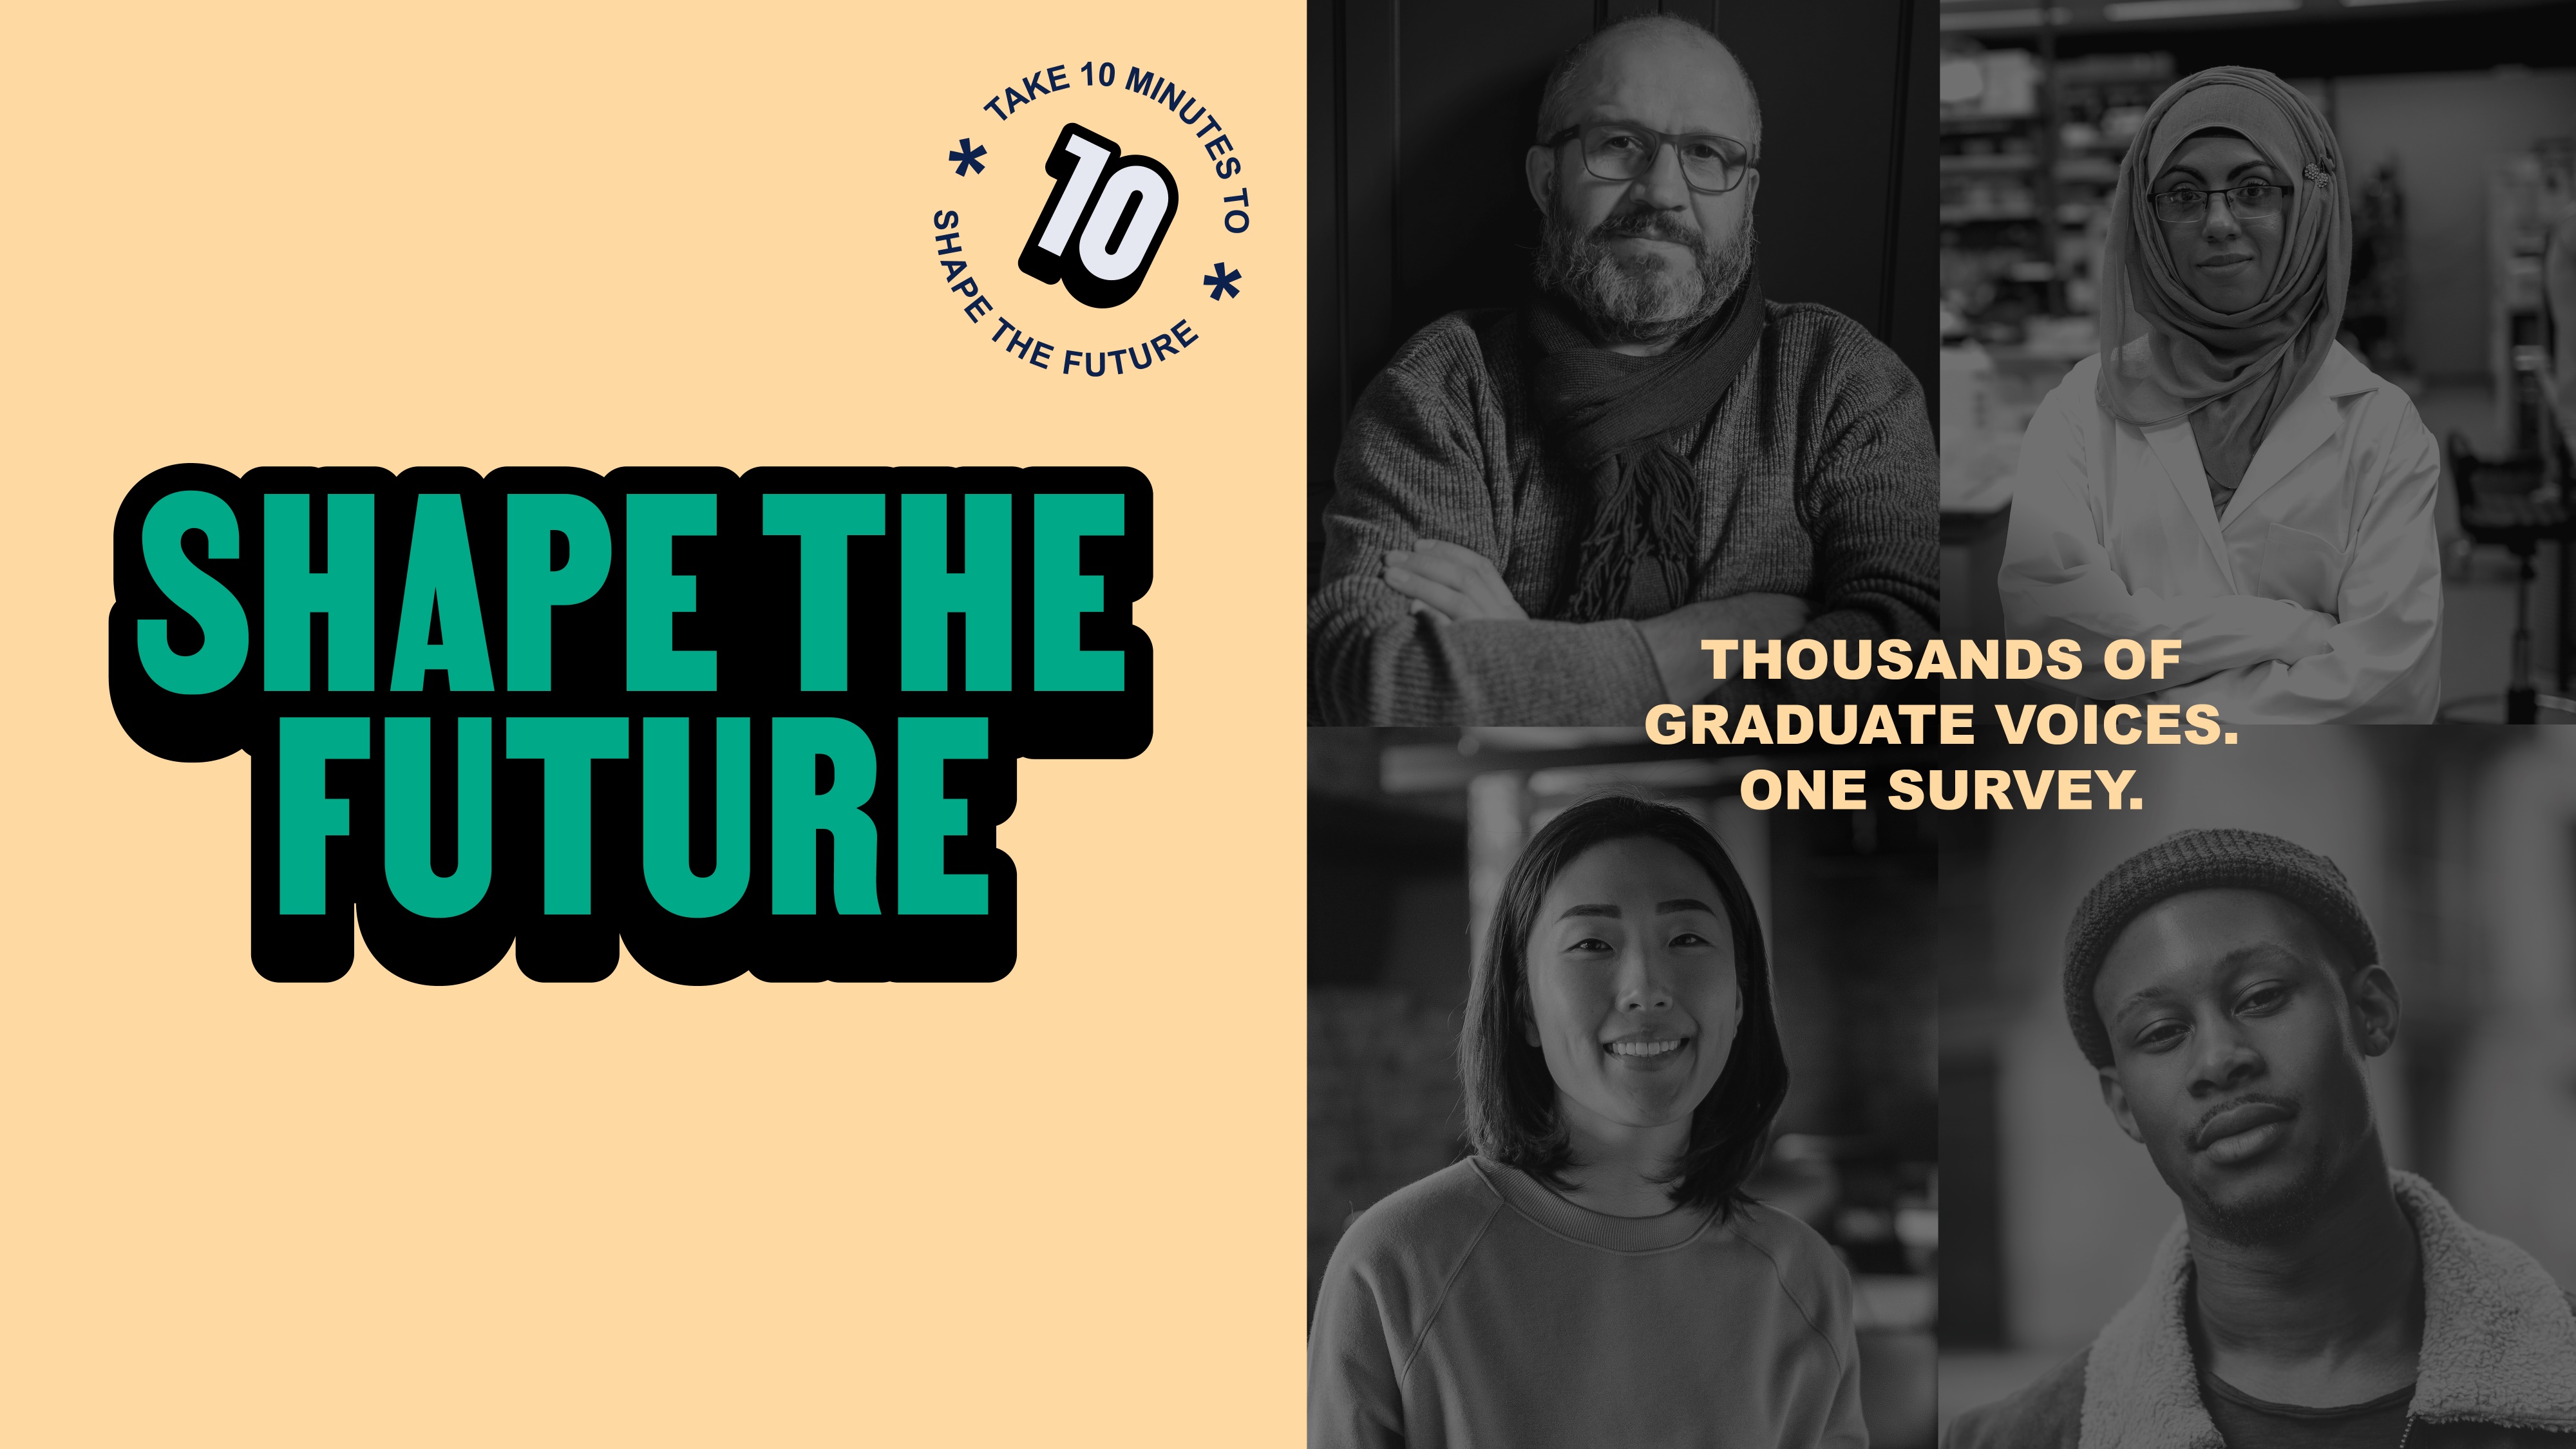 Shape the future. Take 10 minutes to shape the future. Thousands of graduate voices. One survey.